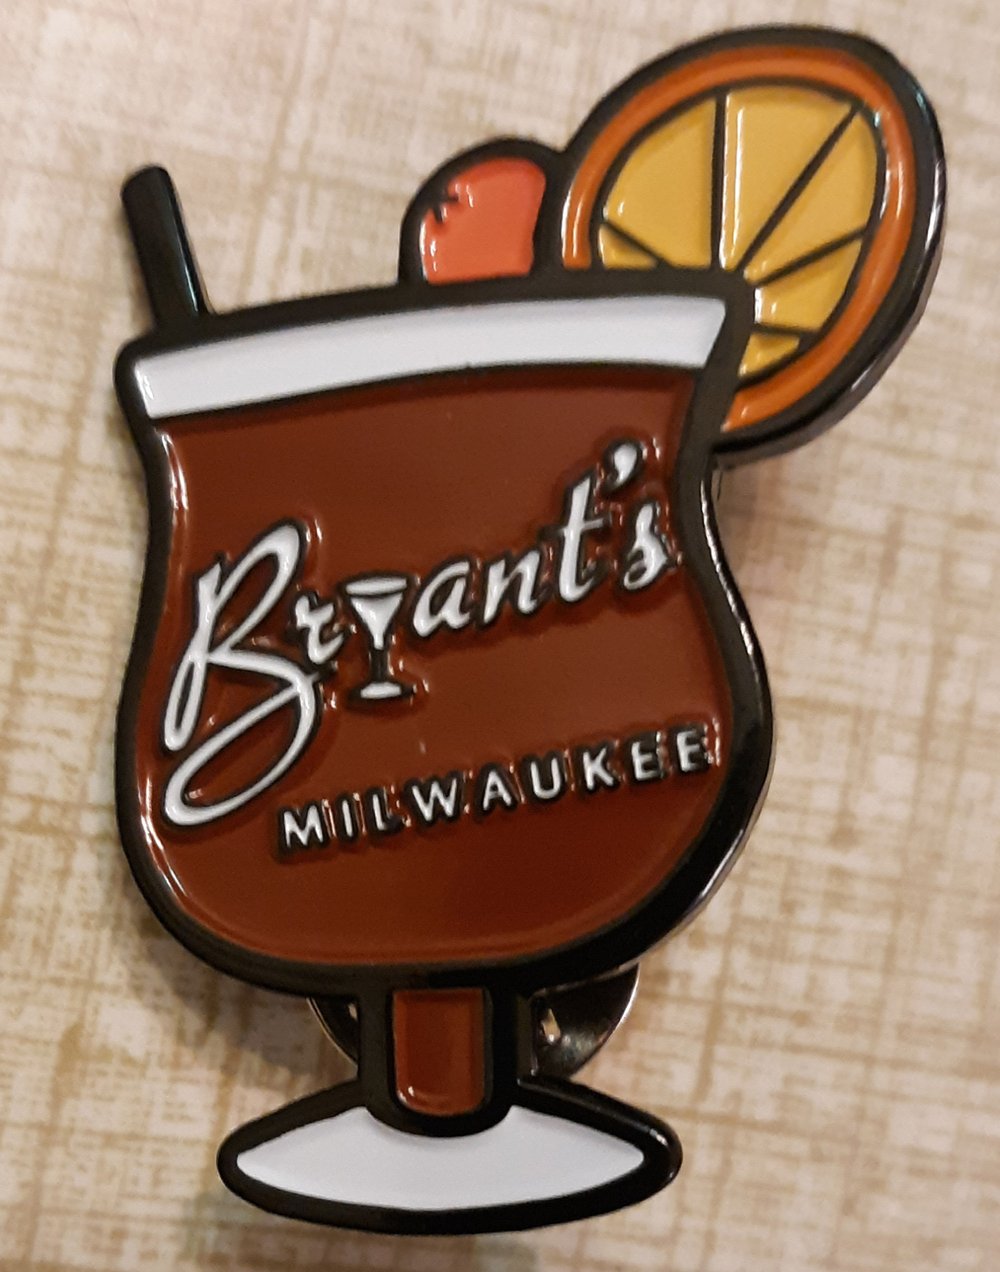 BRYANT'S COCKTAIL LOUNGE Milwaukee 1.5" Old Fashioned Limited Edition Enamel Pin